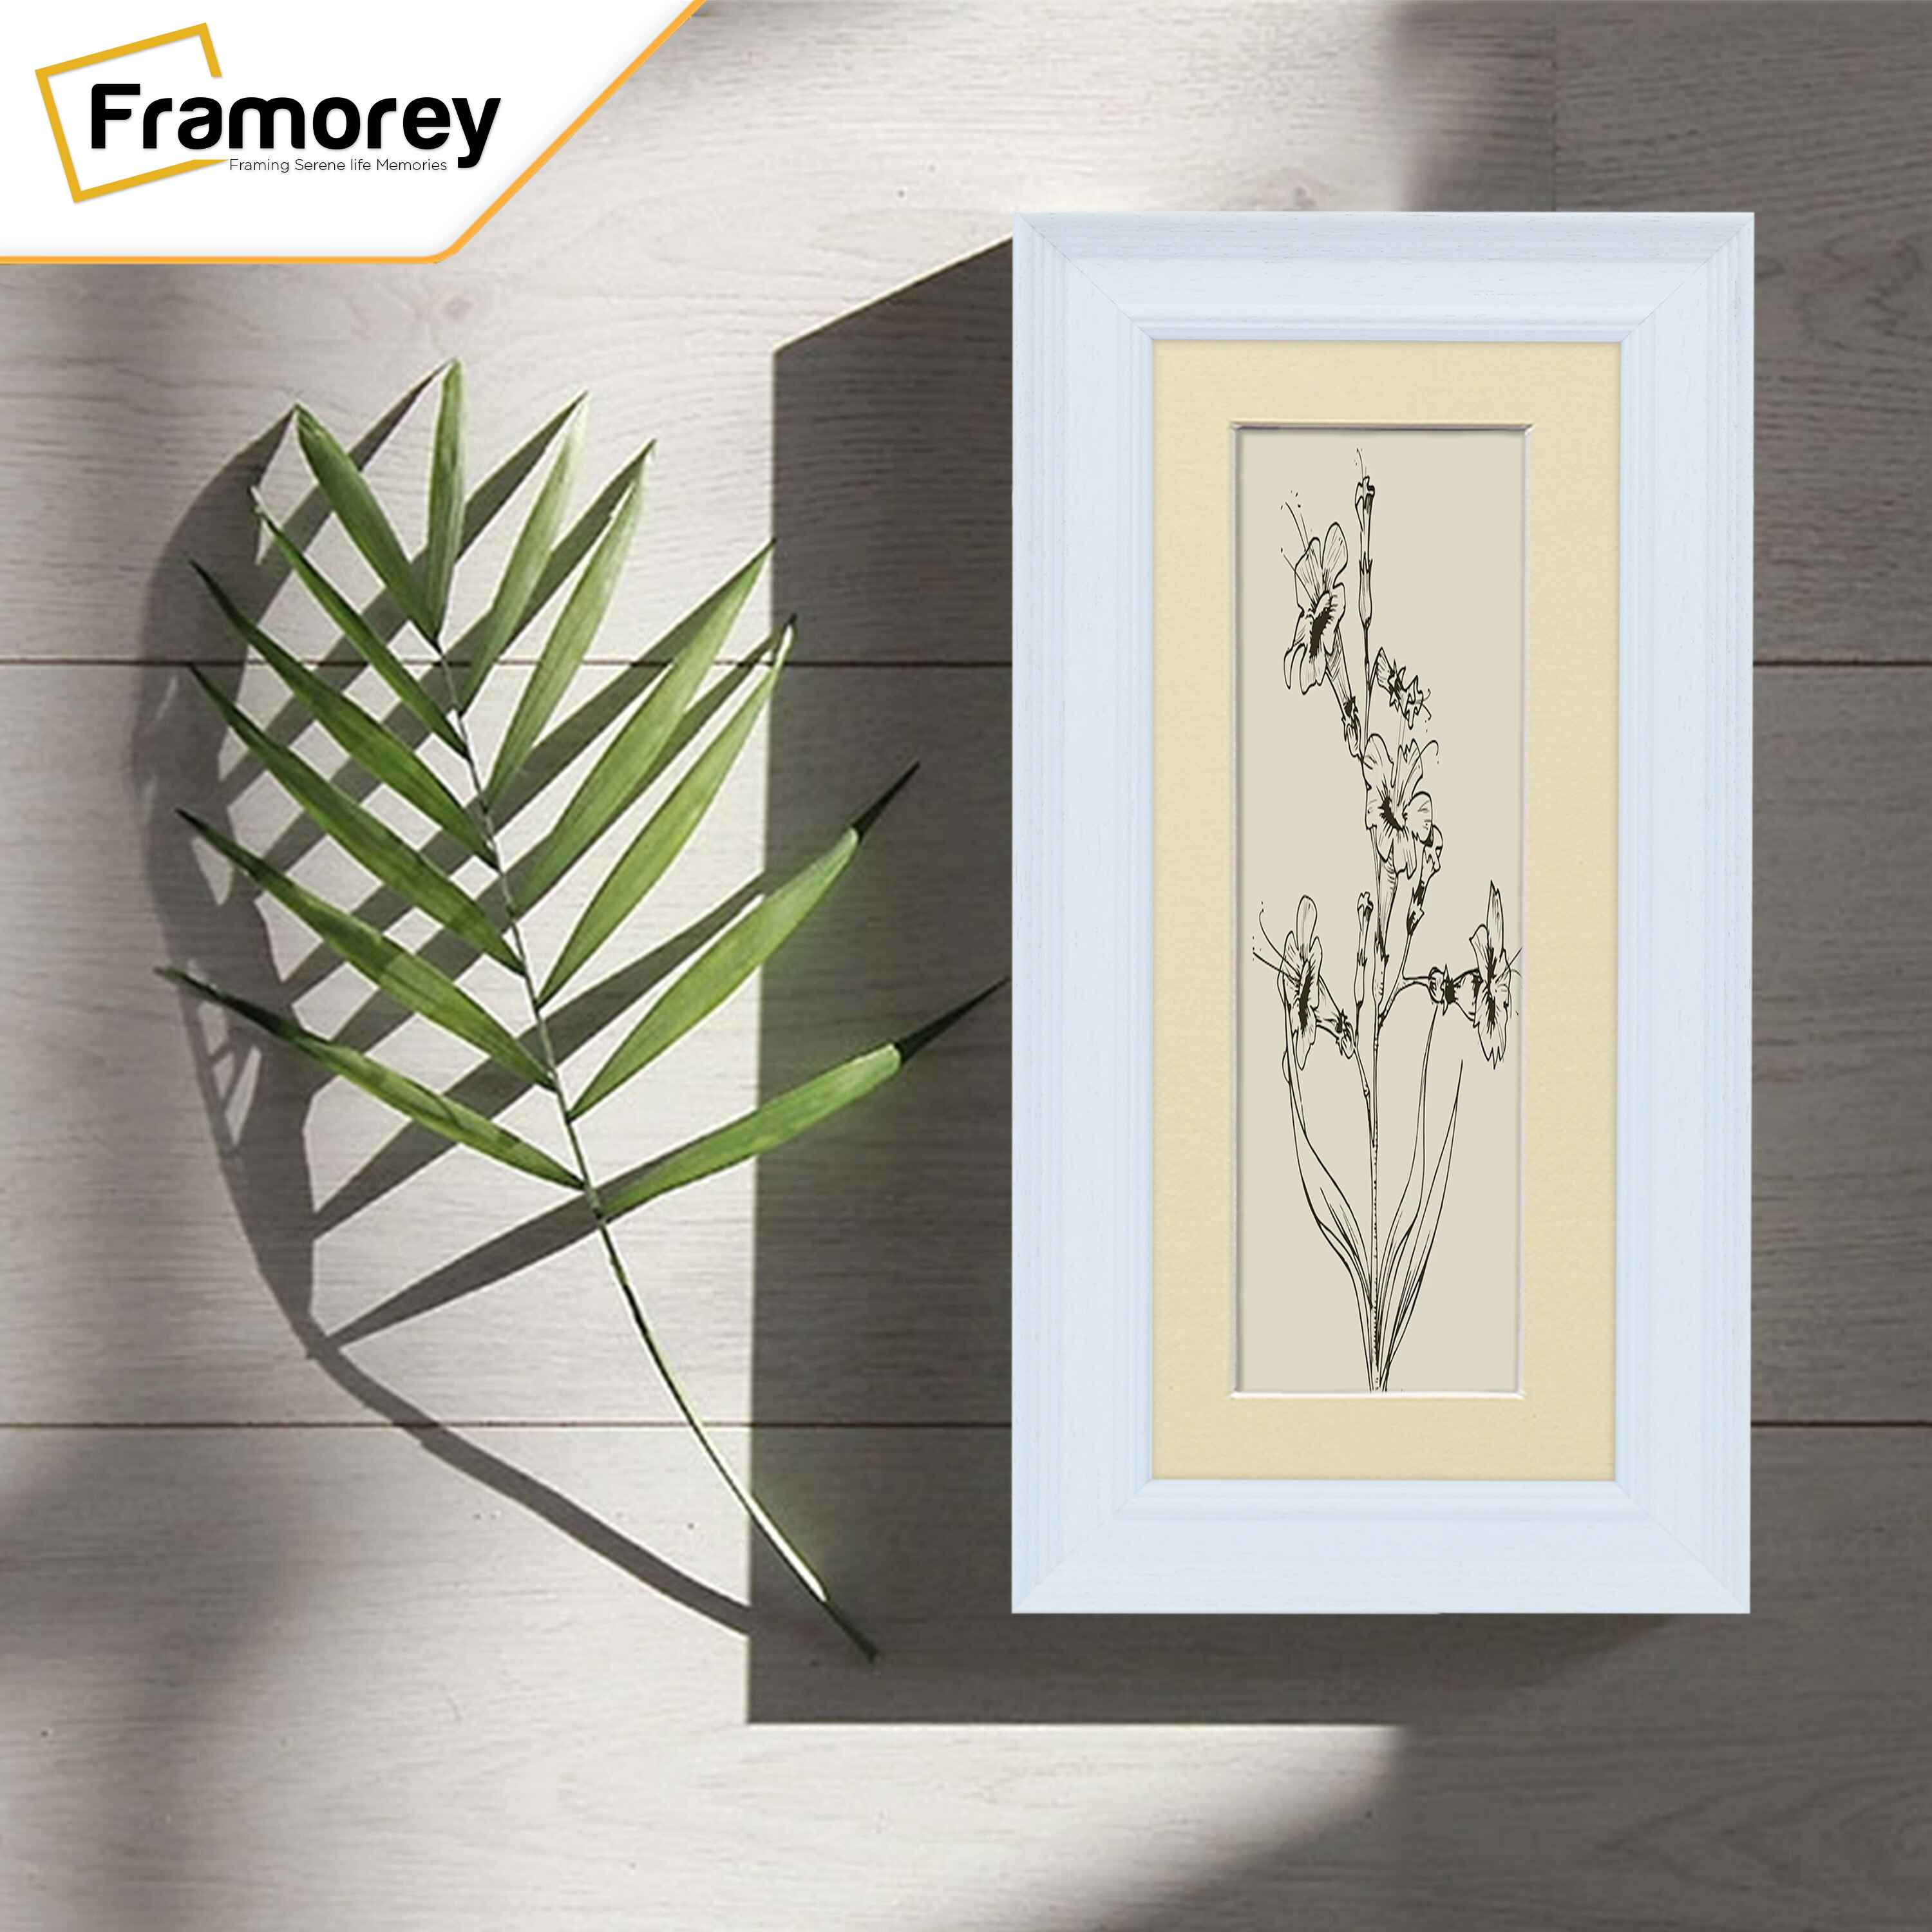 Panoramic Size Grained White Picture Frame Photo Frame Fletcher Wood With Ivory Mount